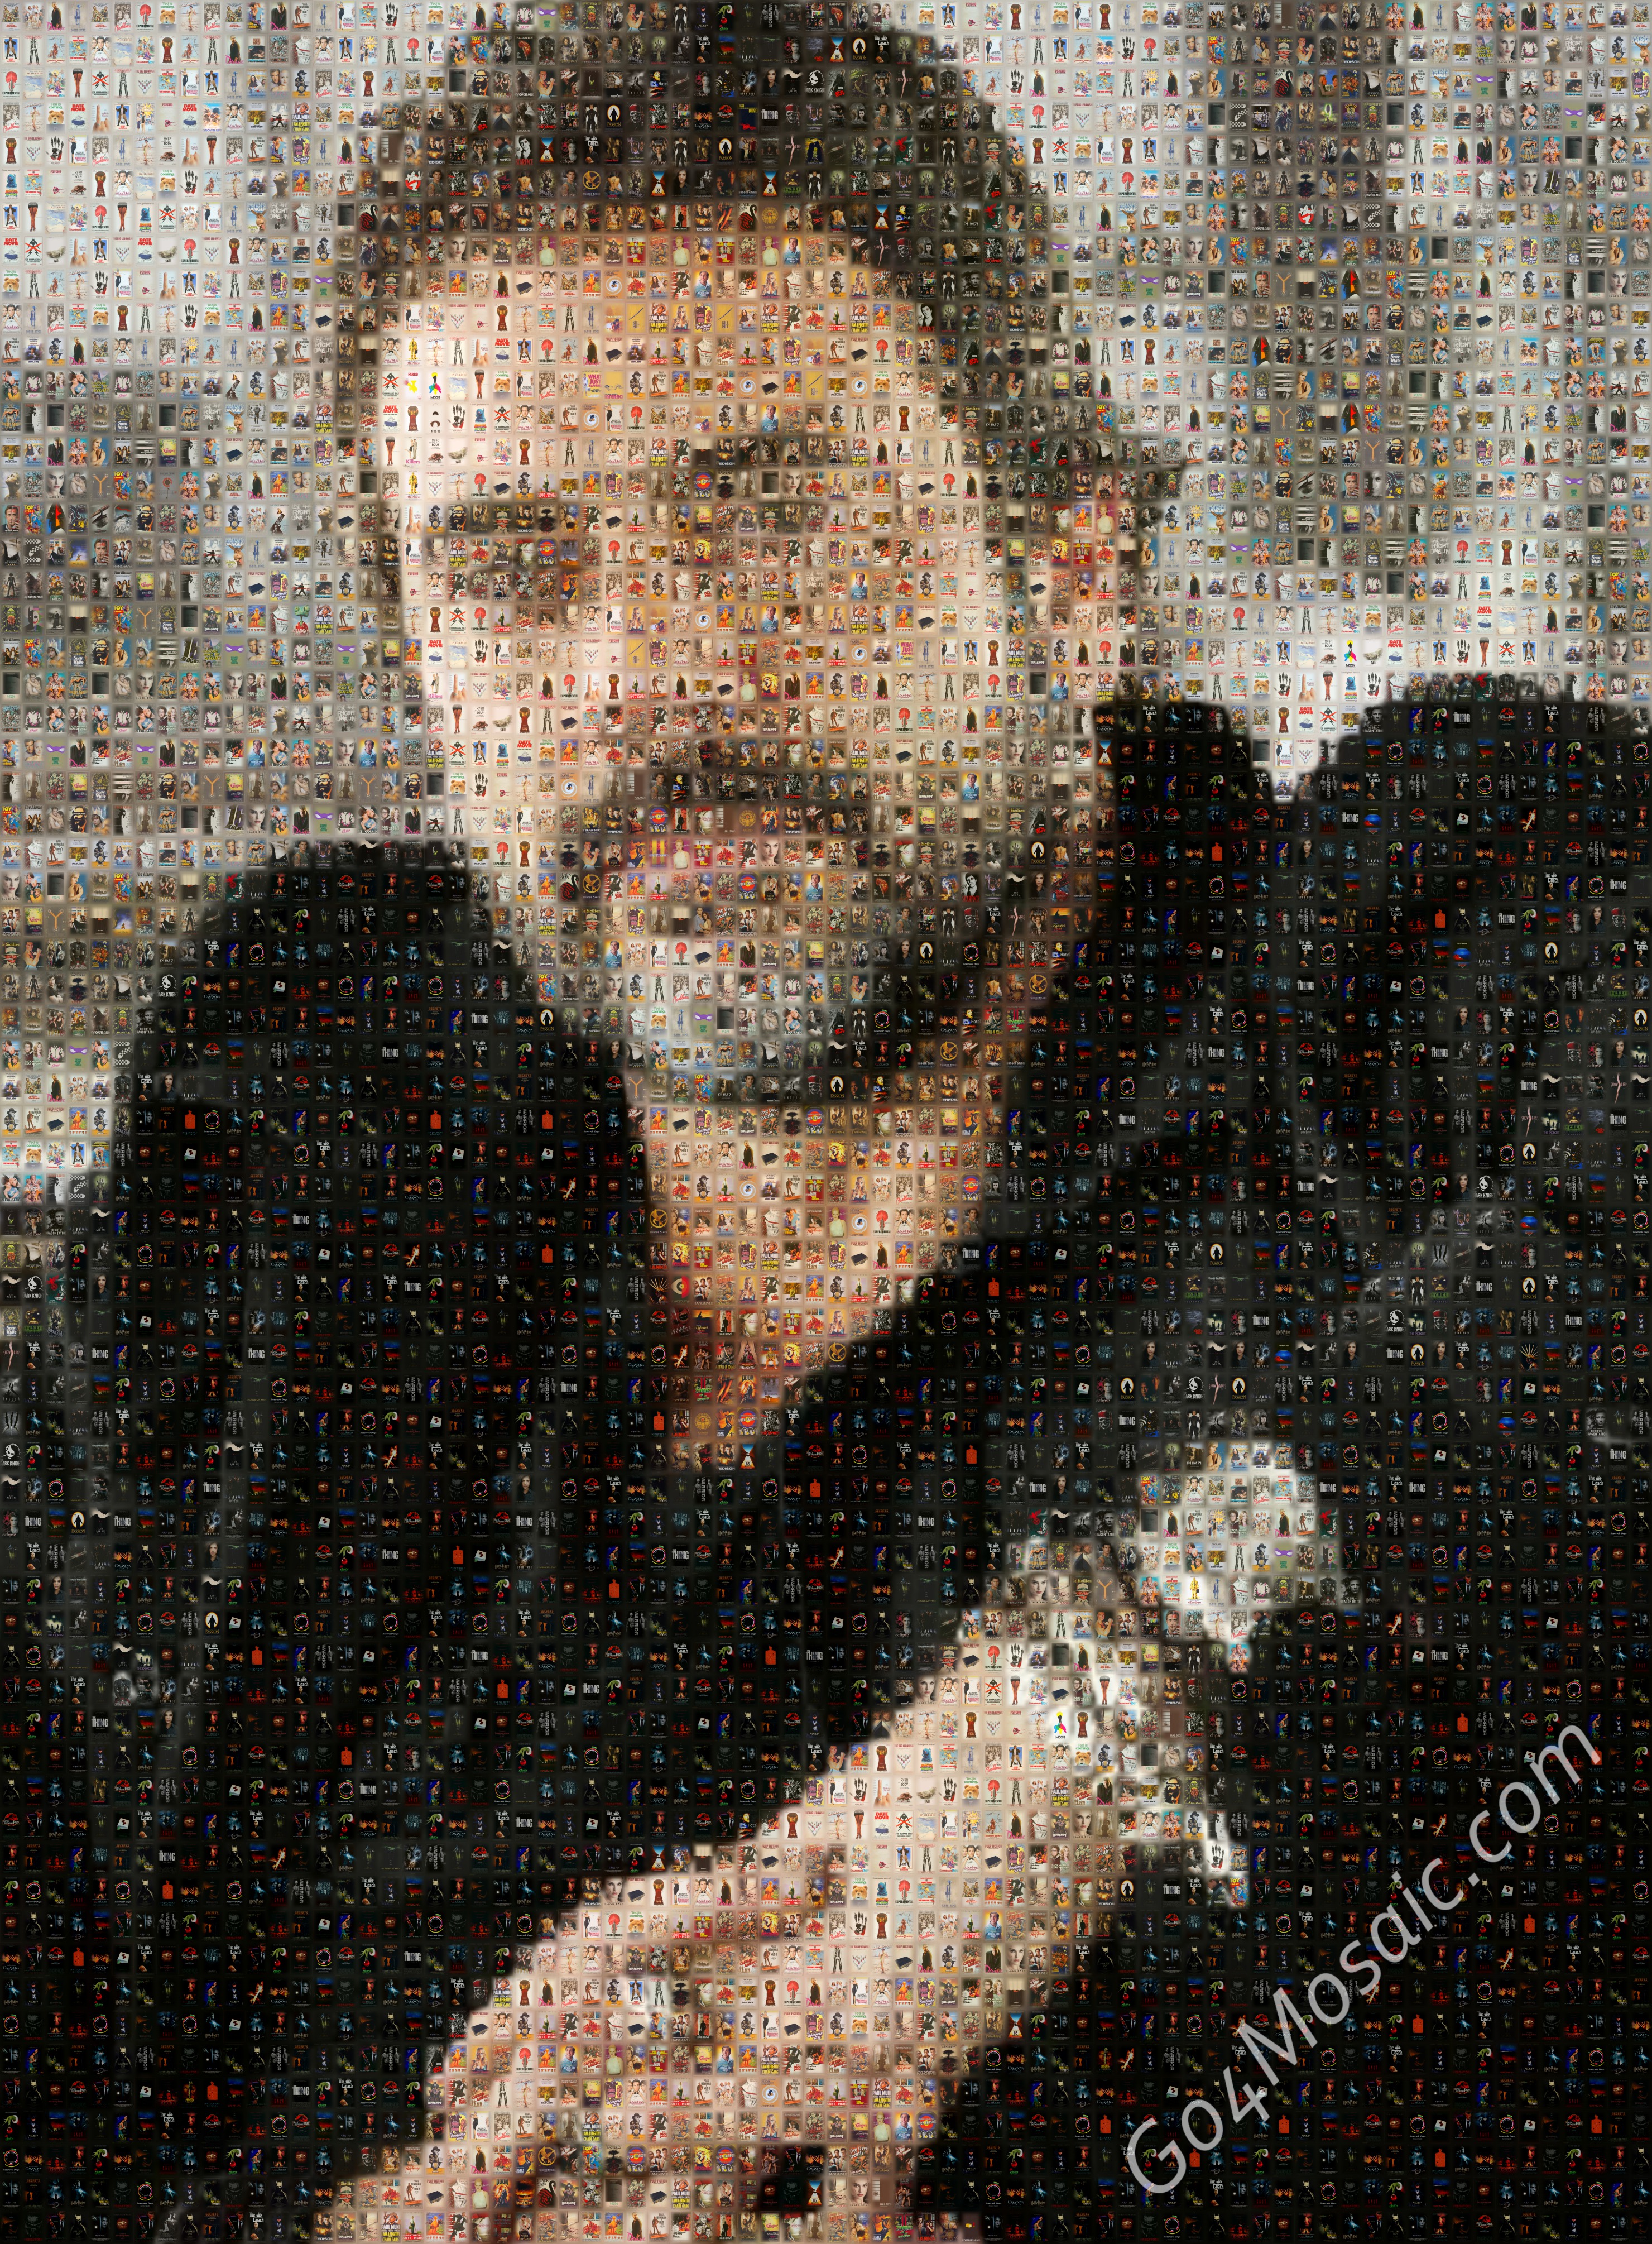 Jeffrey Dean Morgan mosaic from Movie Posters